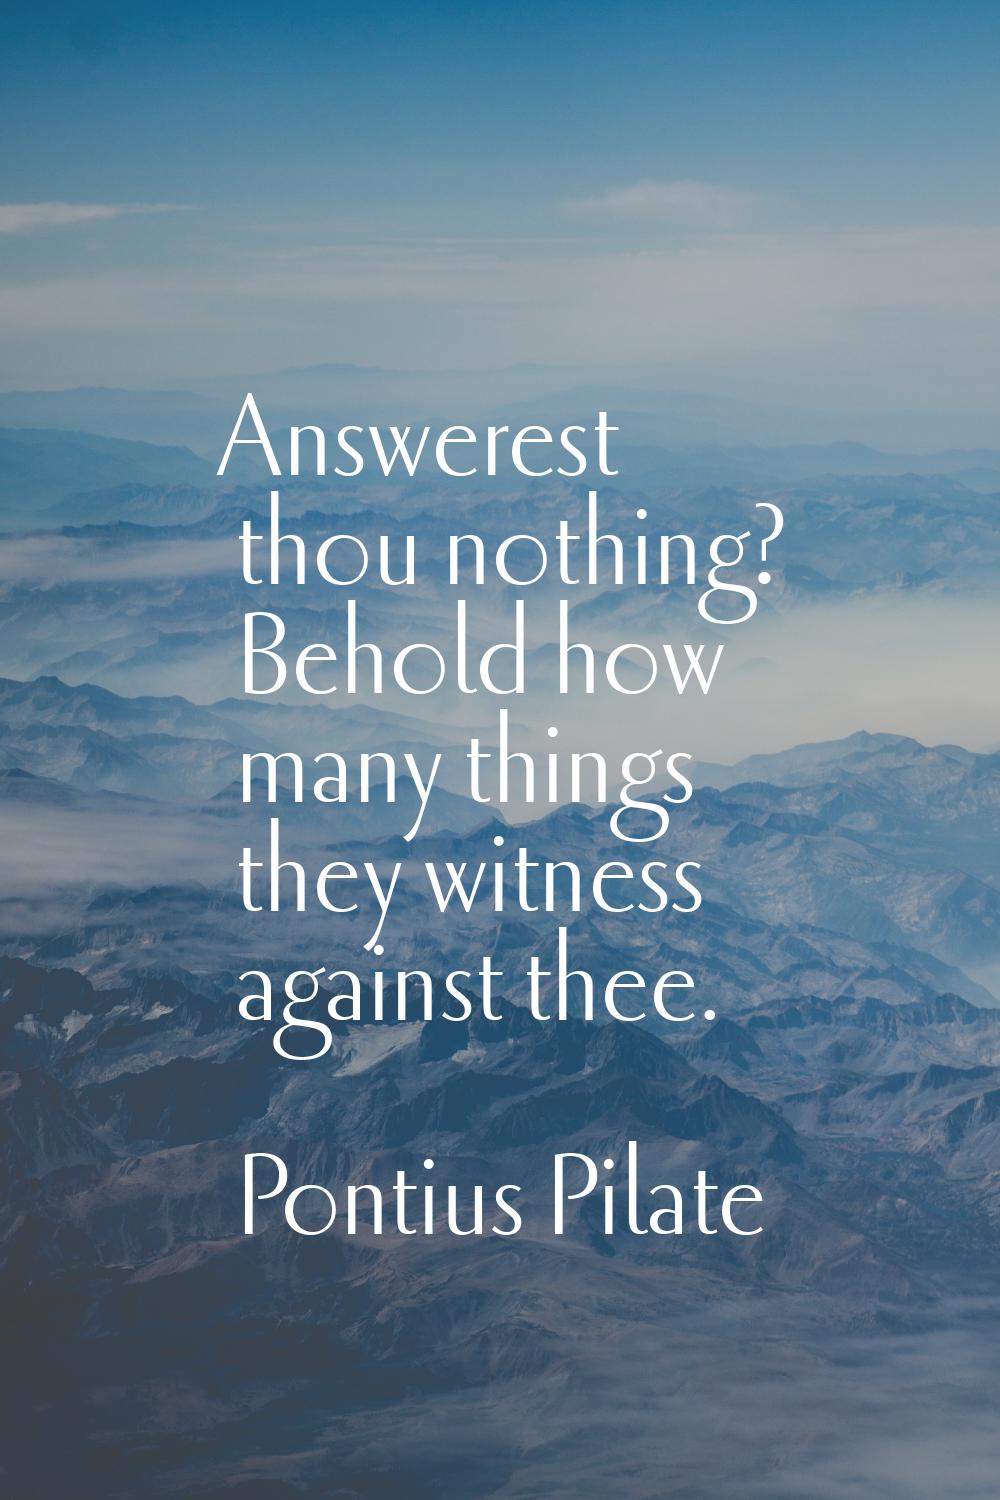 Answerest thou nothing? Behold how many things they witness against thee.